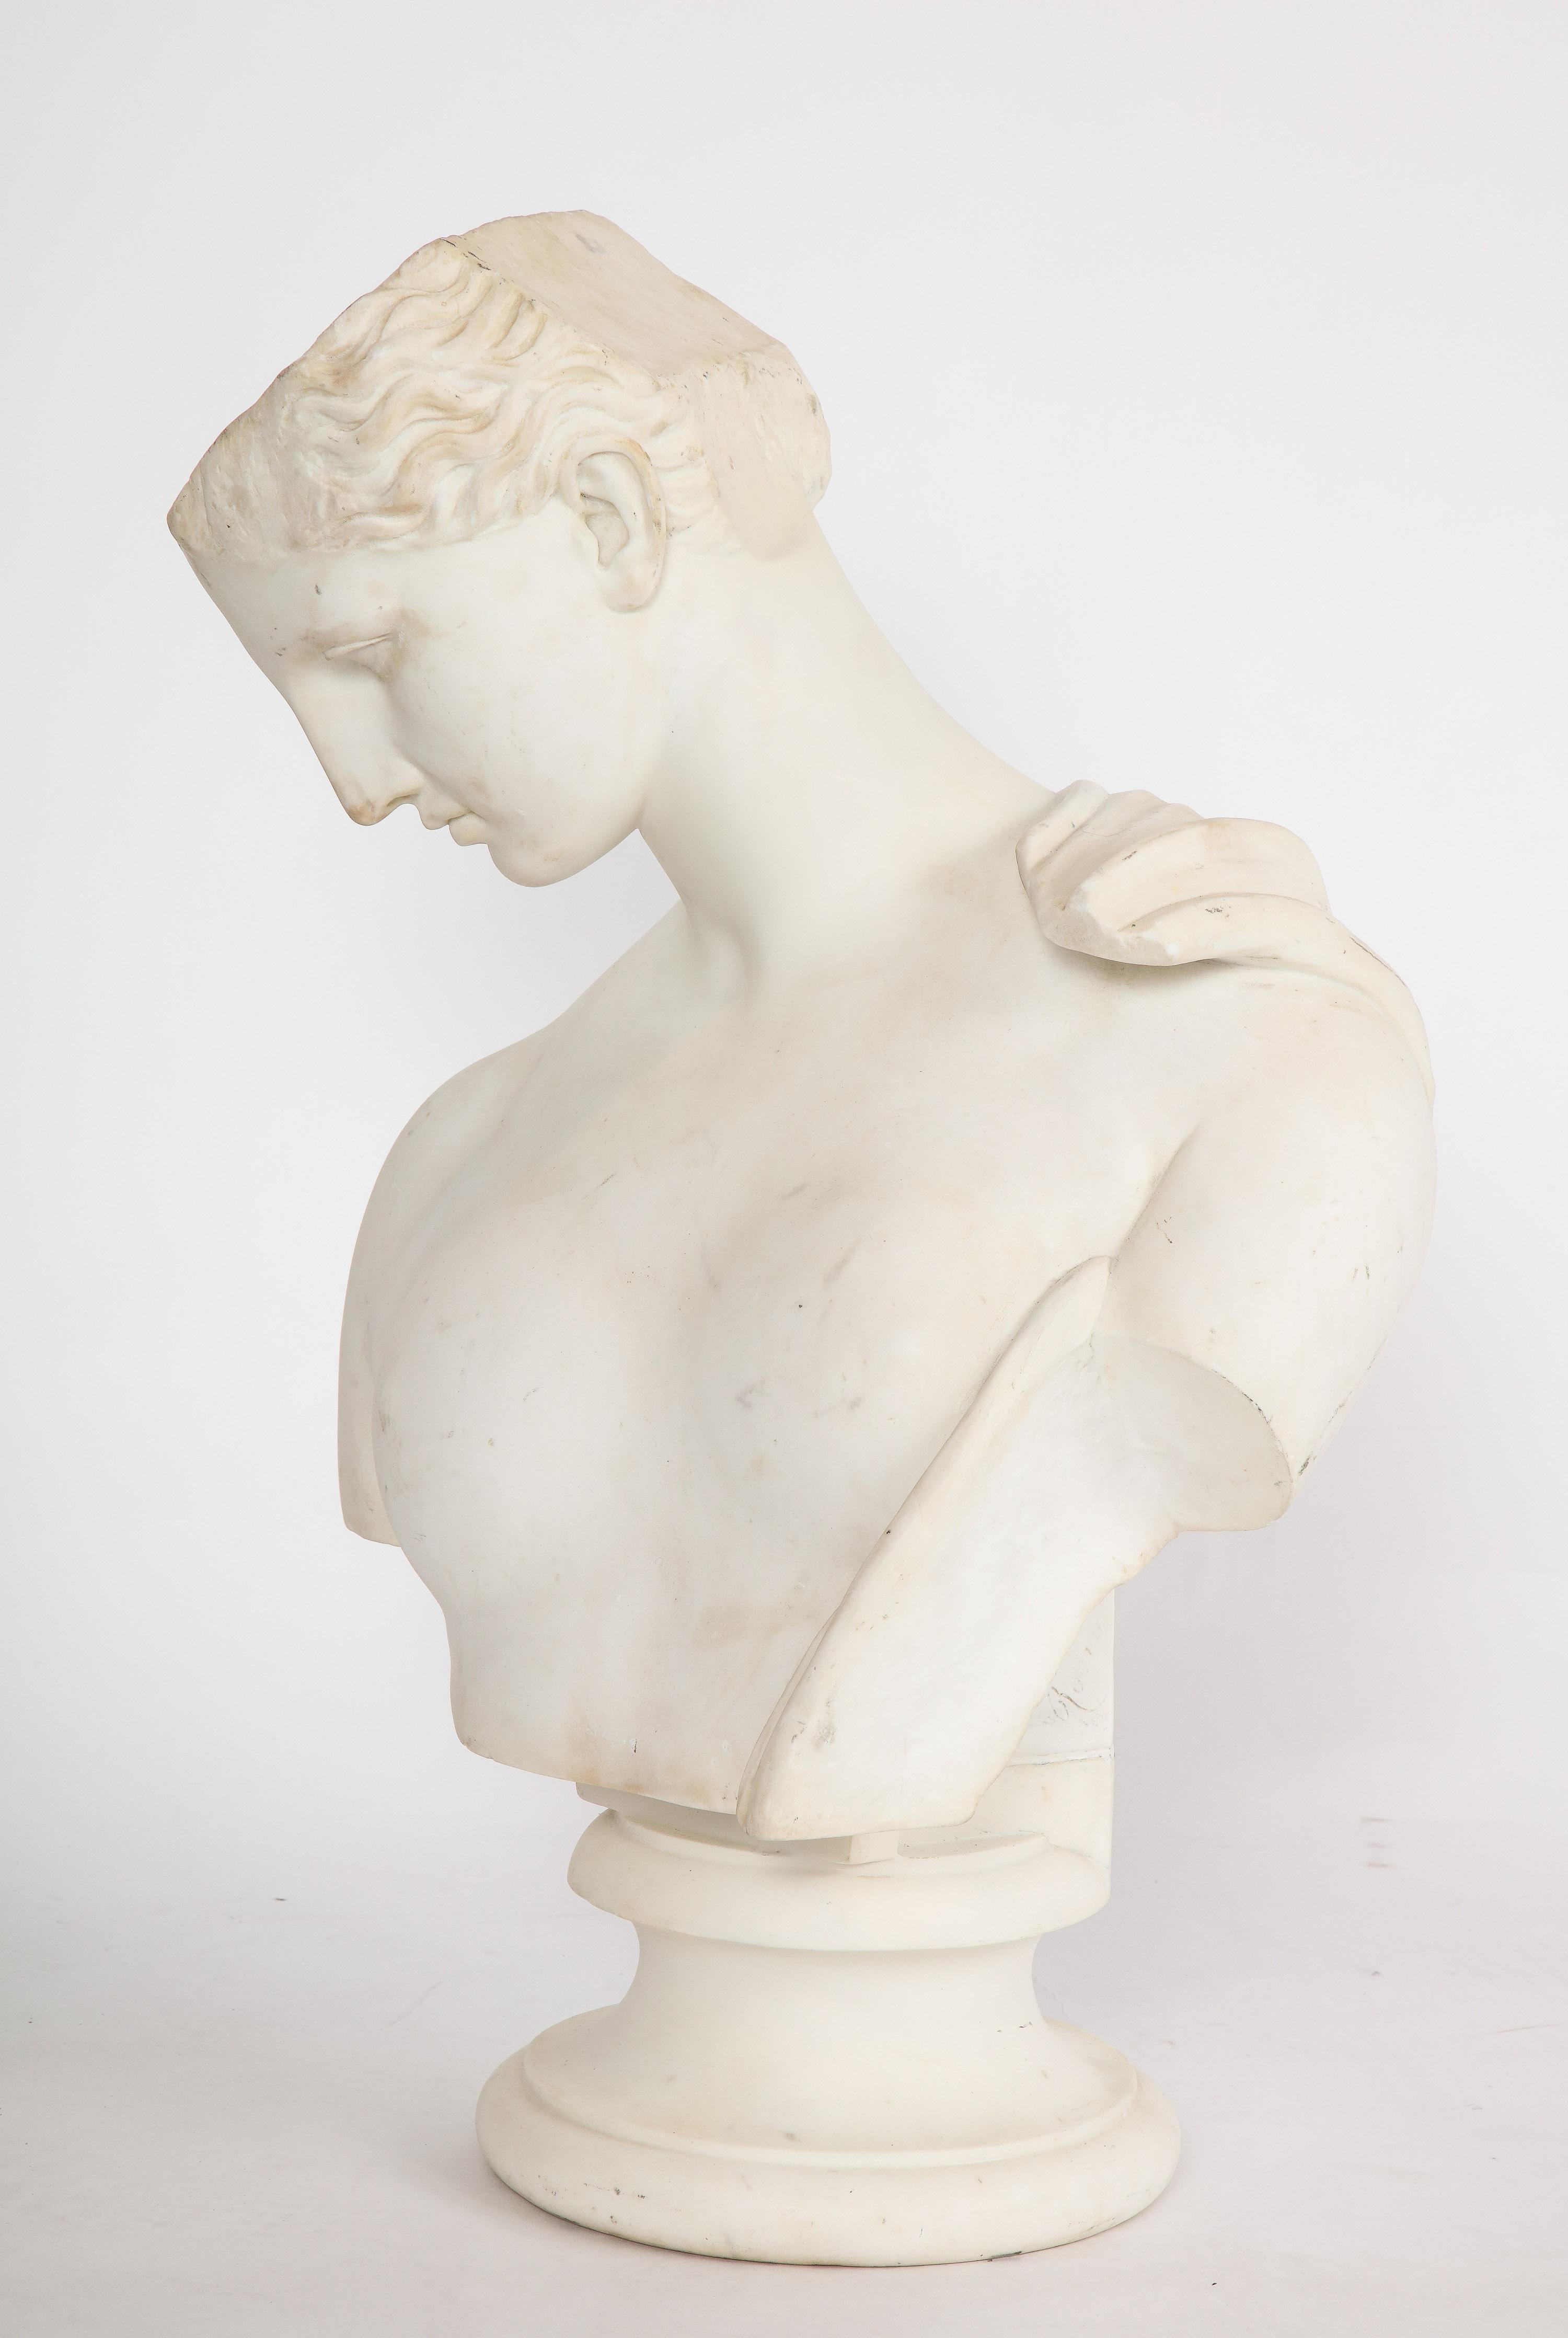 An Antique Italian Neoclassical Marble Bust of Psyche, by Giuseppe Carnevale - Sculpture by Unknown